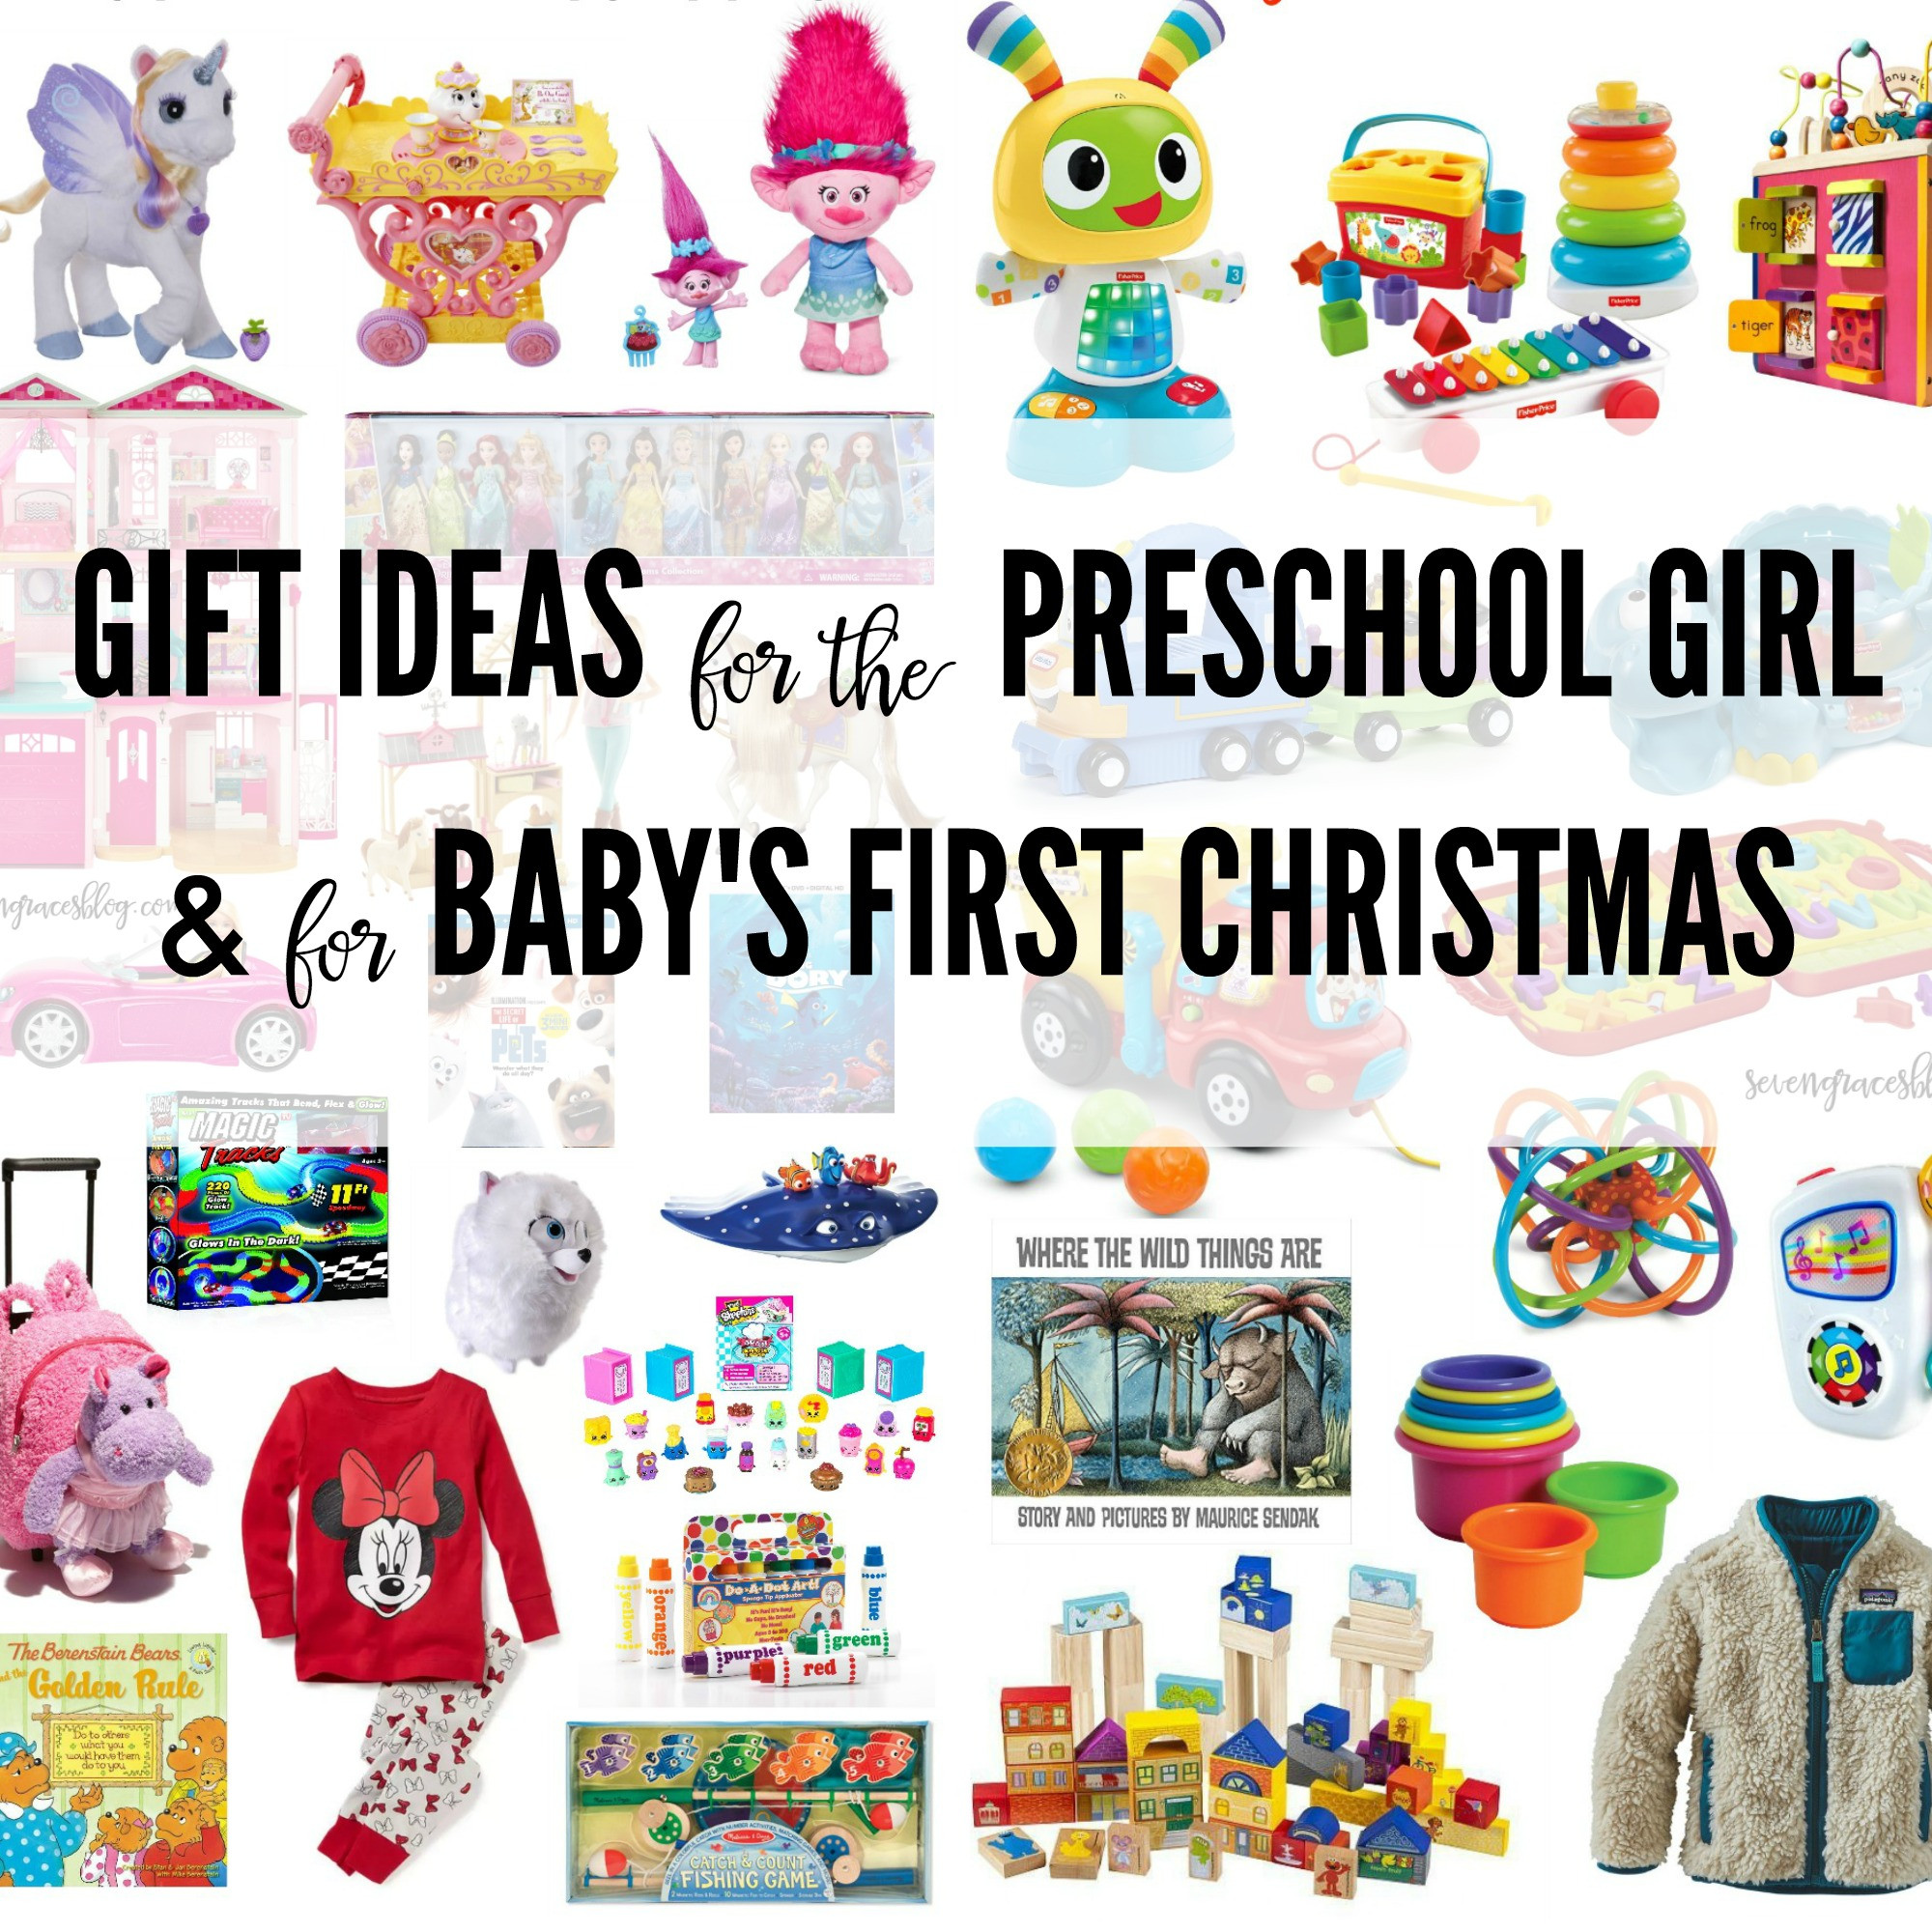 Baby'S First Christmas Gift Ideas
 Gift Ideas for the Preschool Girl and for Baby s First